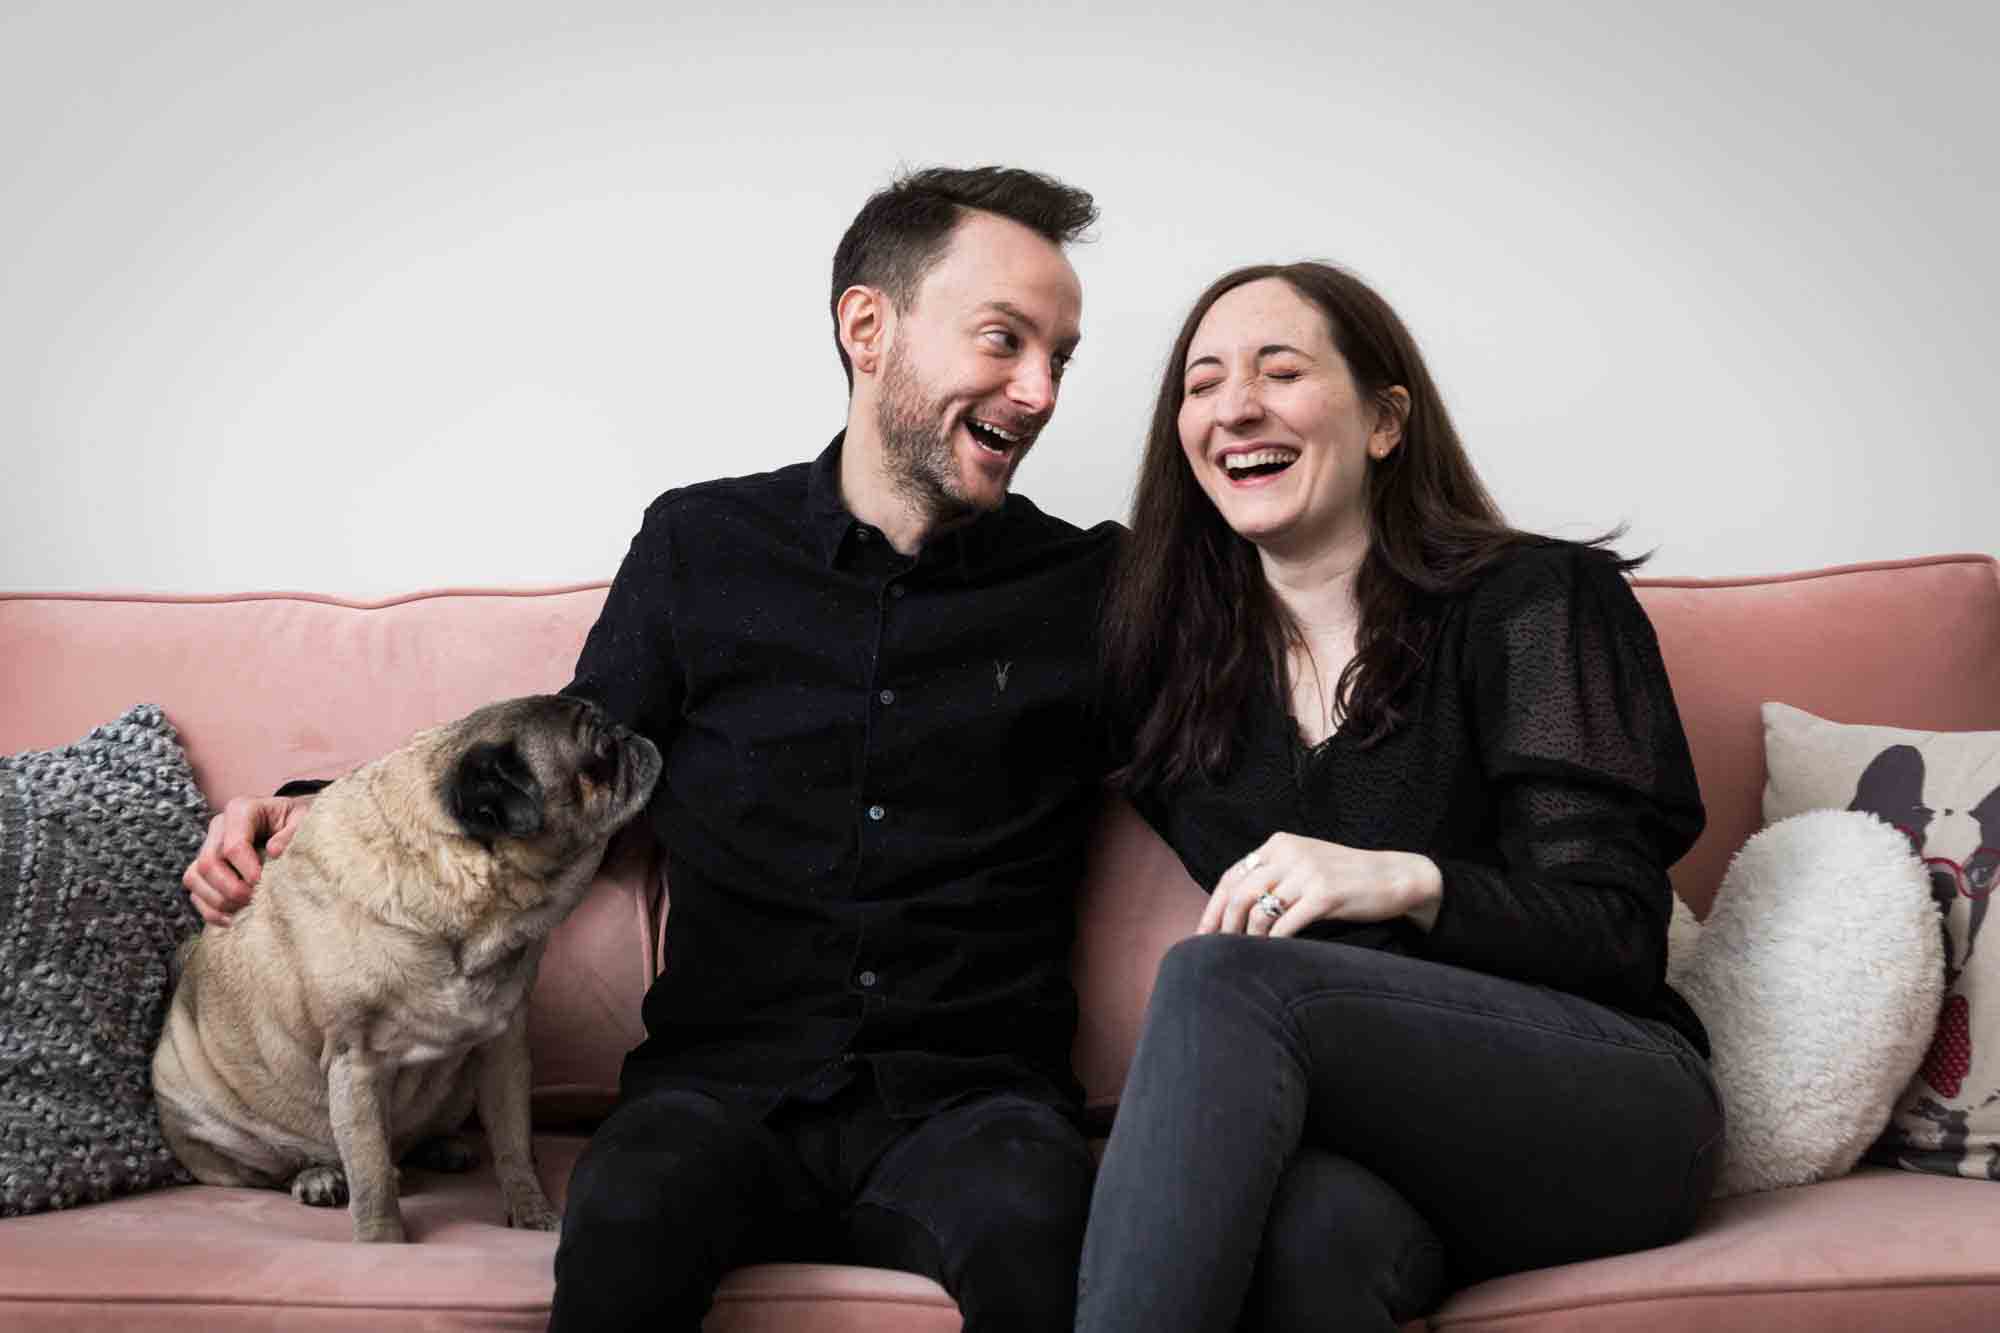 Couple with pug dog sitting on pink couch laughing